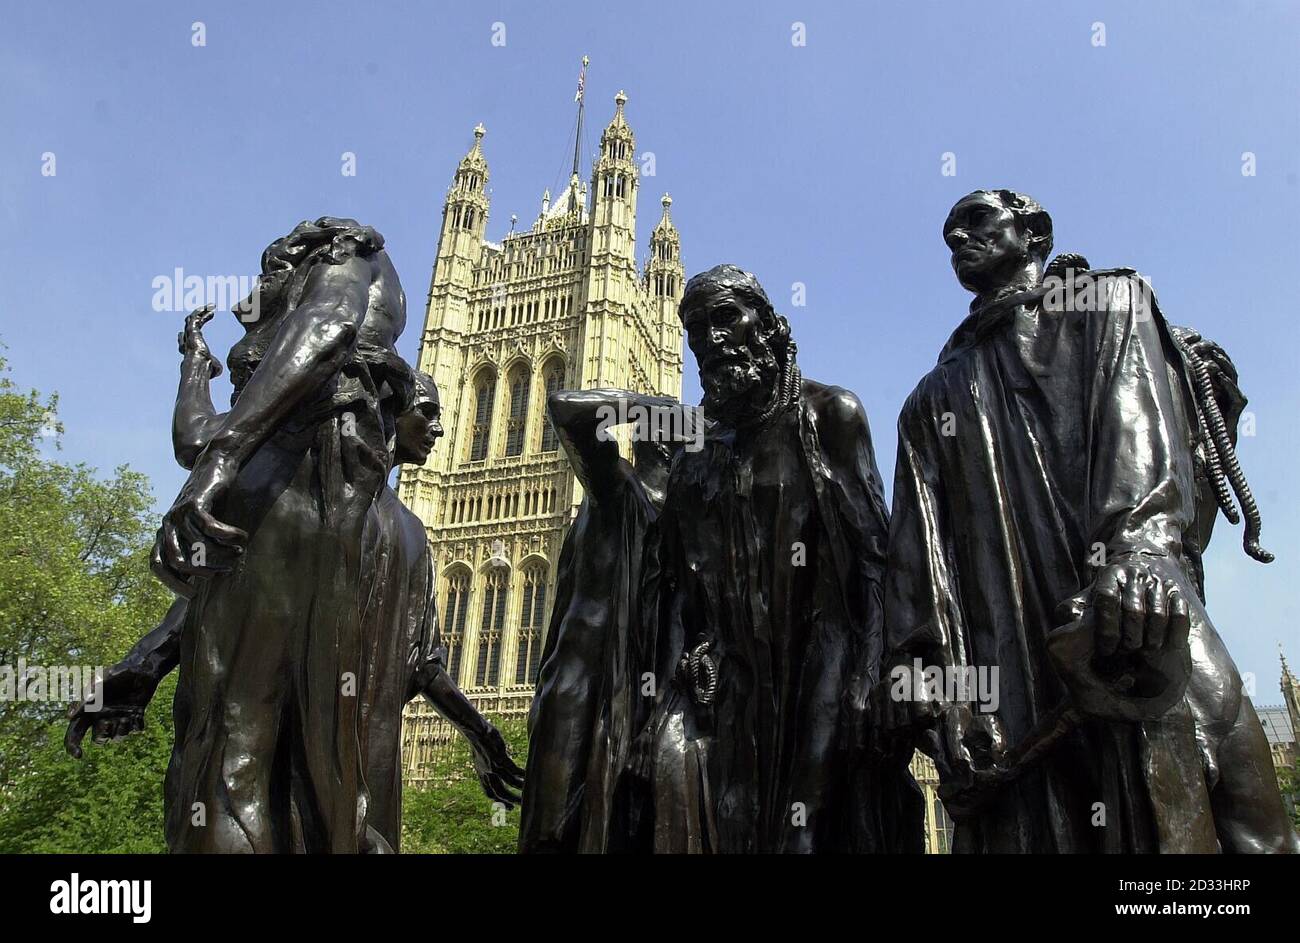 The Burghers of Calais sculpure unveiled by Sir Nicholas Goodison, former Chairman of the Art Fund and his wife in Victoria Tower Gardens, London. The sculpture was originally removed for safekeeping in the Second World War and then removed to a low plinth in the 1950's. The 'Burghers of Calais' one of over 750,000 works that the National Art Collections Fund has saved for the UK since its foundation in 1903. Stock Photo